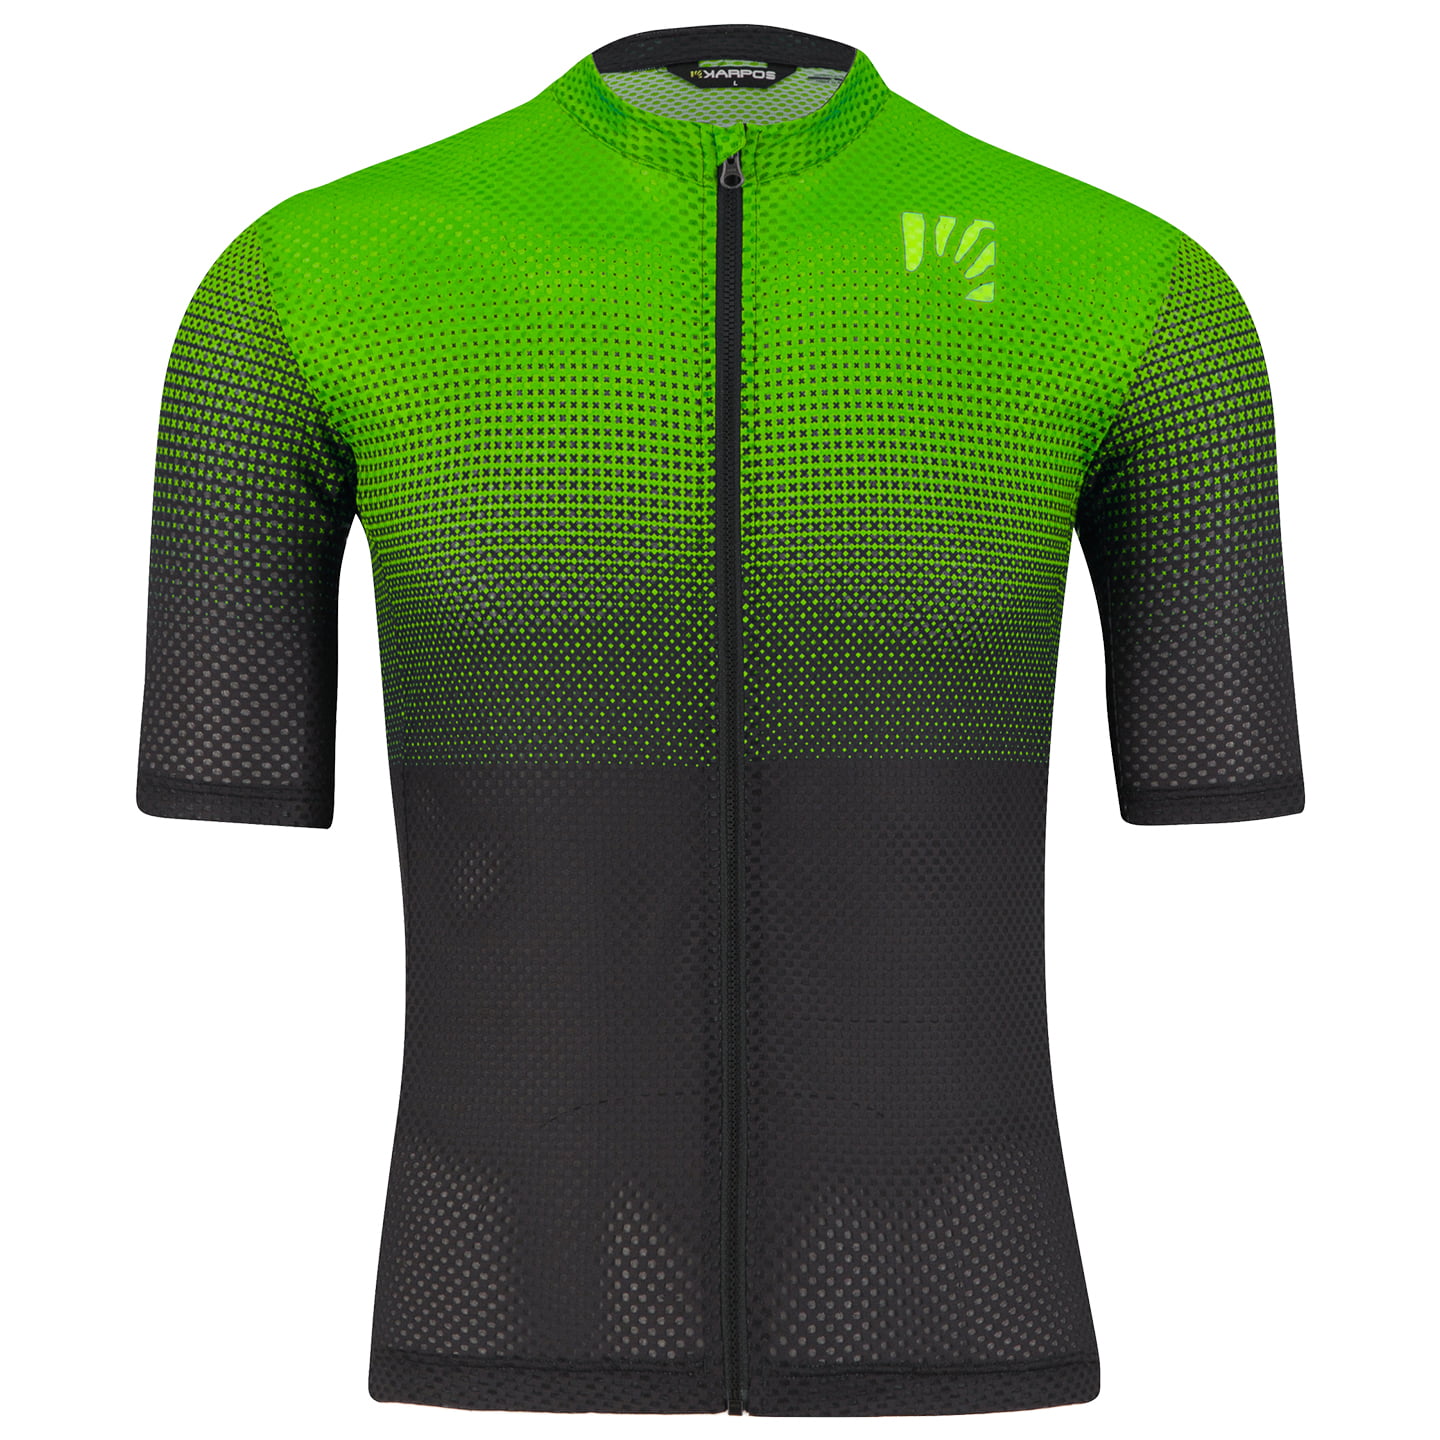 KARPOS Val Viola Short Sleeve Jersey Short Sleeve Jersey, for men, size 2XL, Cycling jersey, Cycle clothing